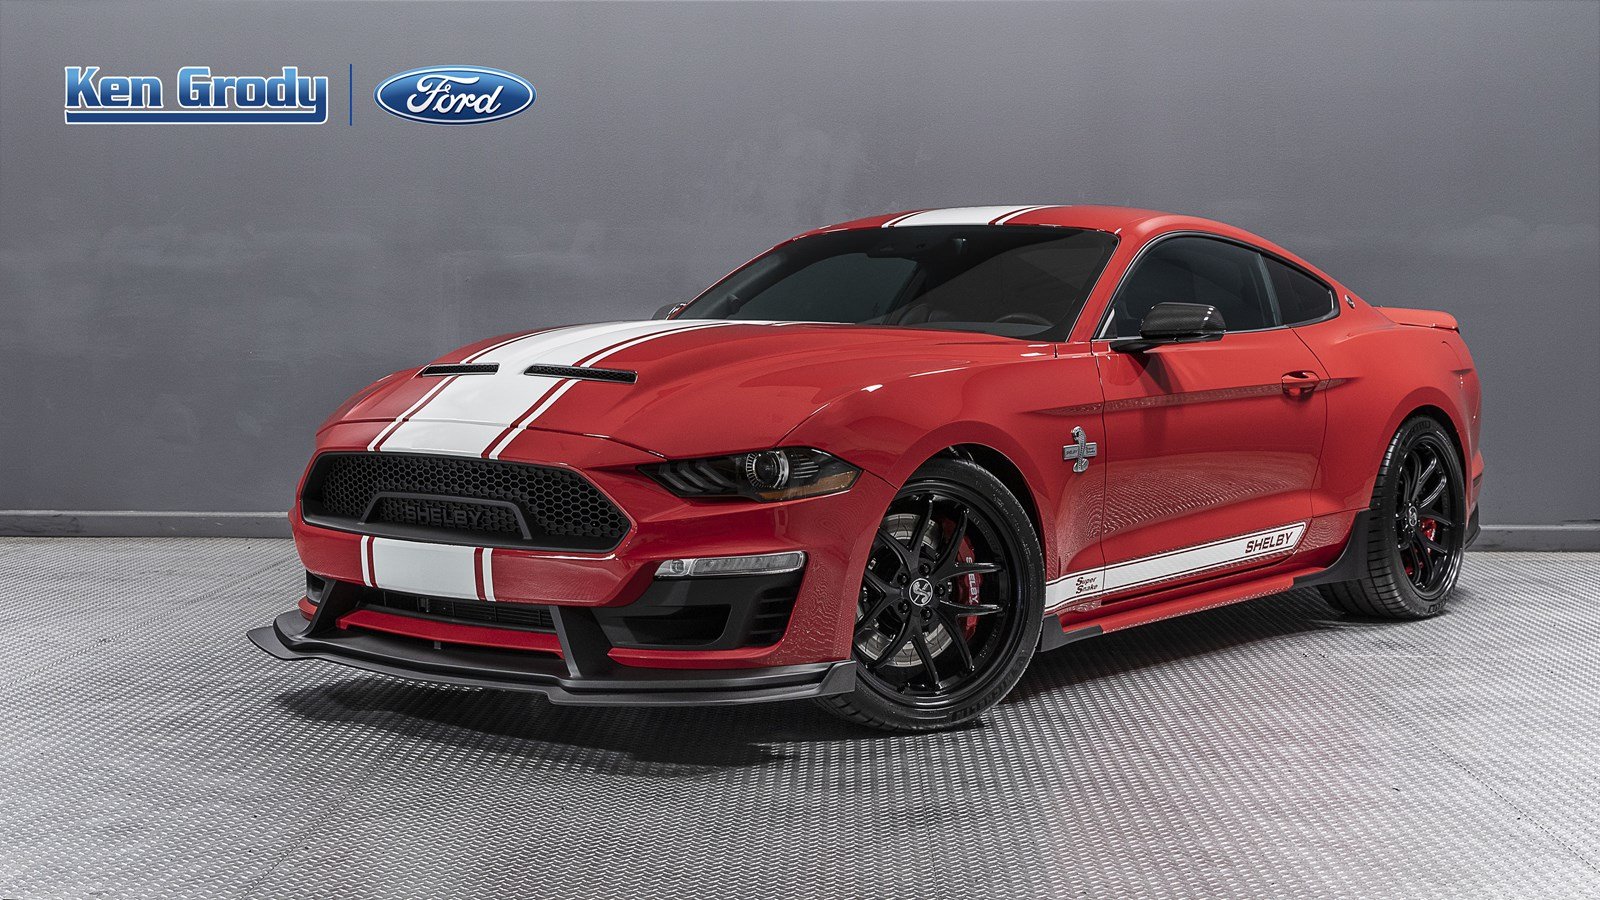 2019 Mustang Gt Used 2019 Ford Mustang Gt Coupe Rwd For